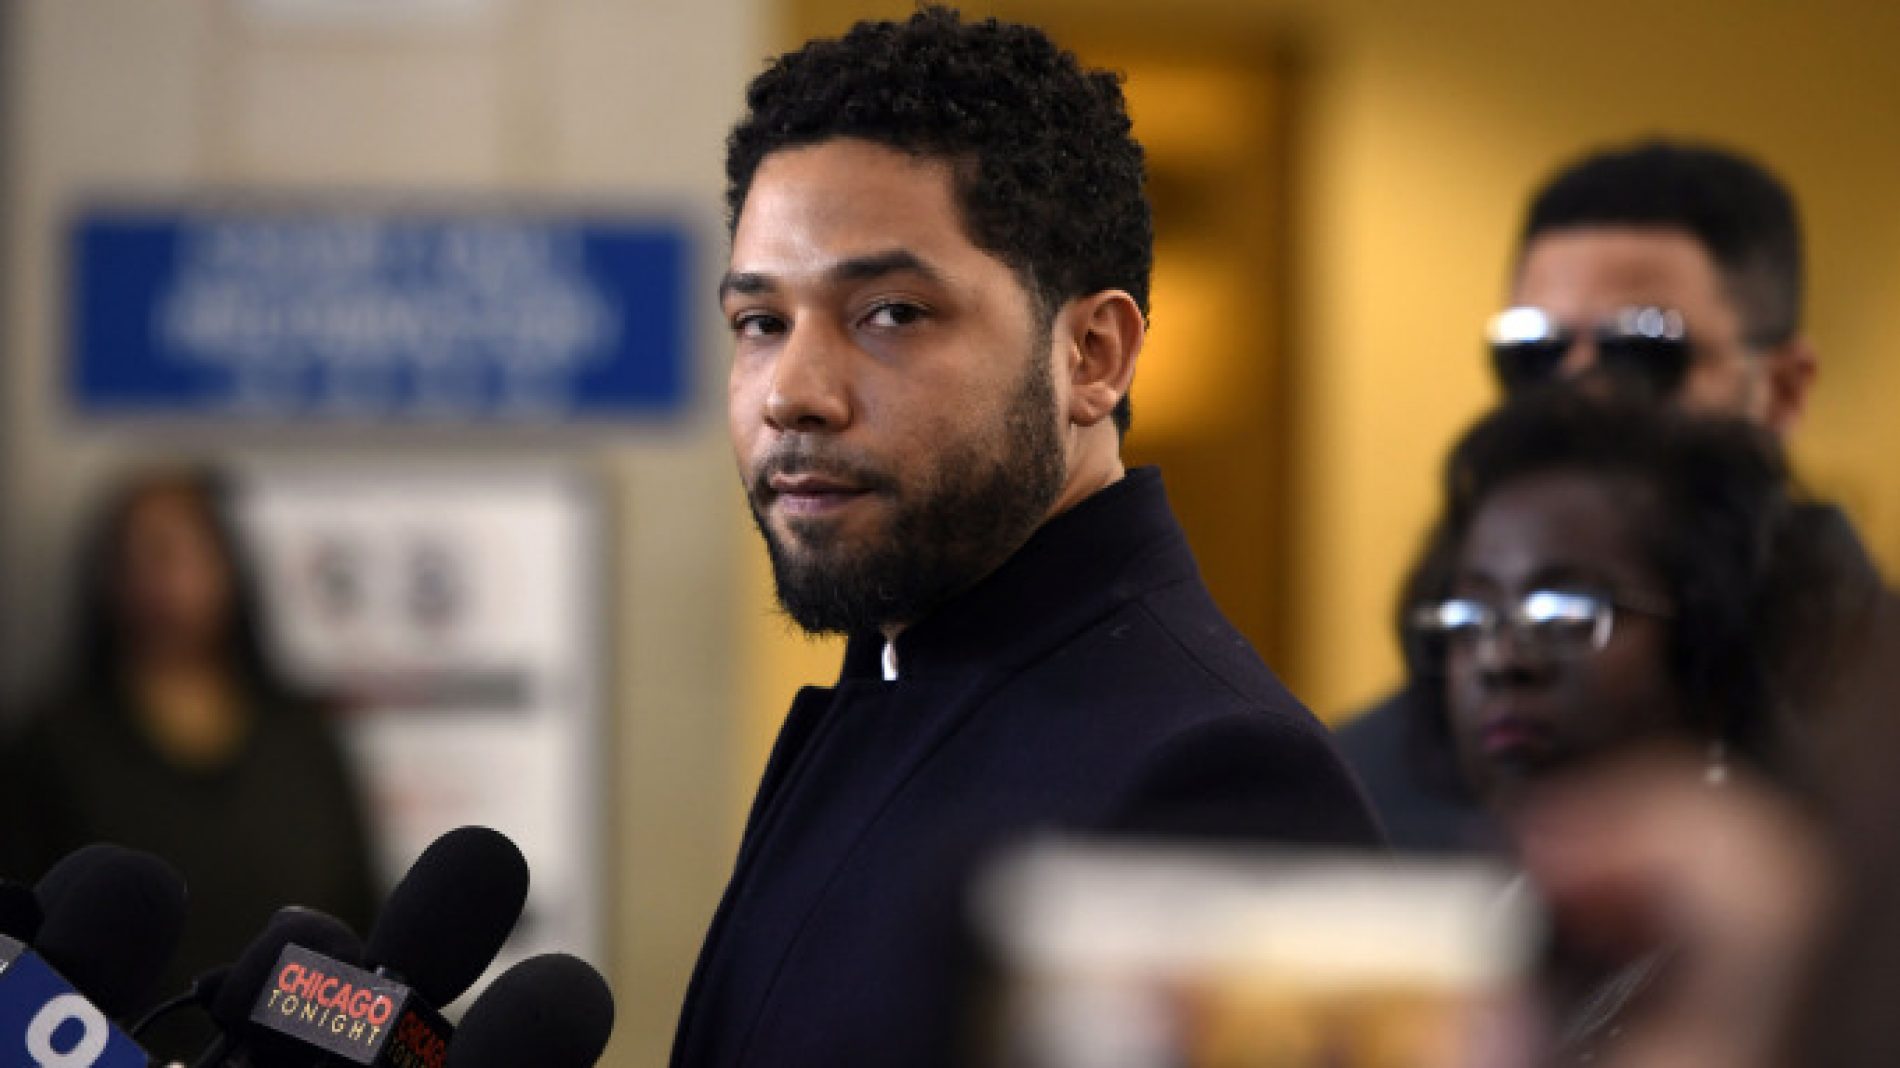 Jussie Smollett Indicted Over False Hate Crime Attack By Special Prosecutor; Former ‘Empire’ Star Headed Back To Court